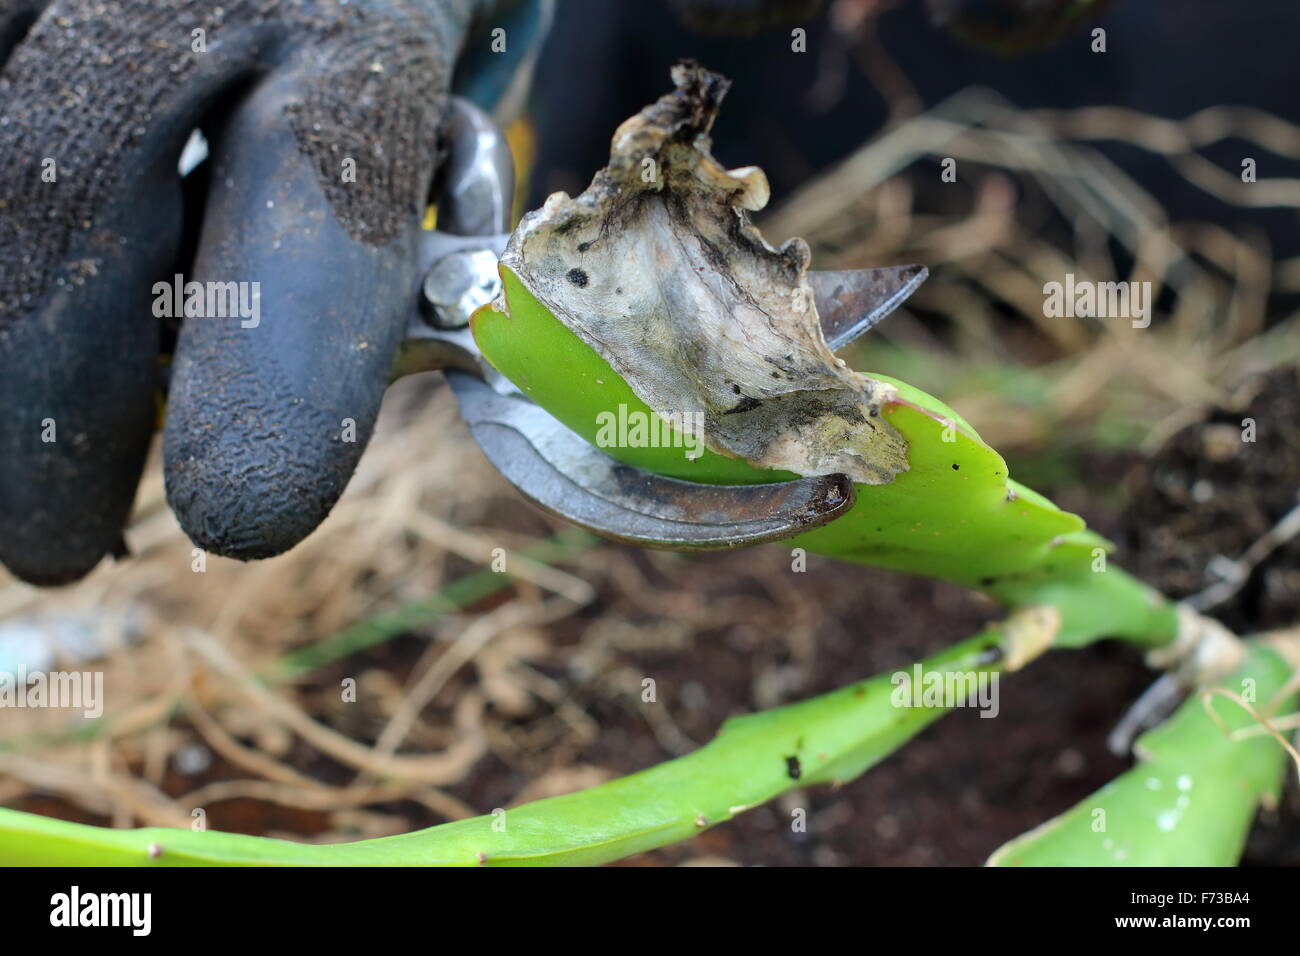 Removing Damaged Epiphyllum or also known as Orchid cactus Stock Photo